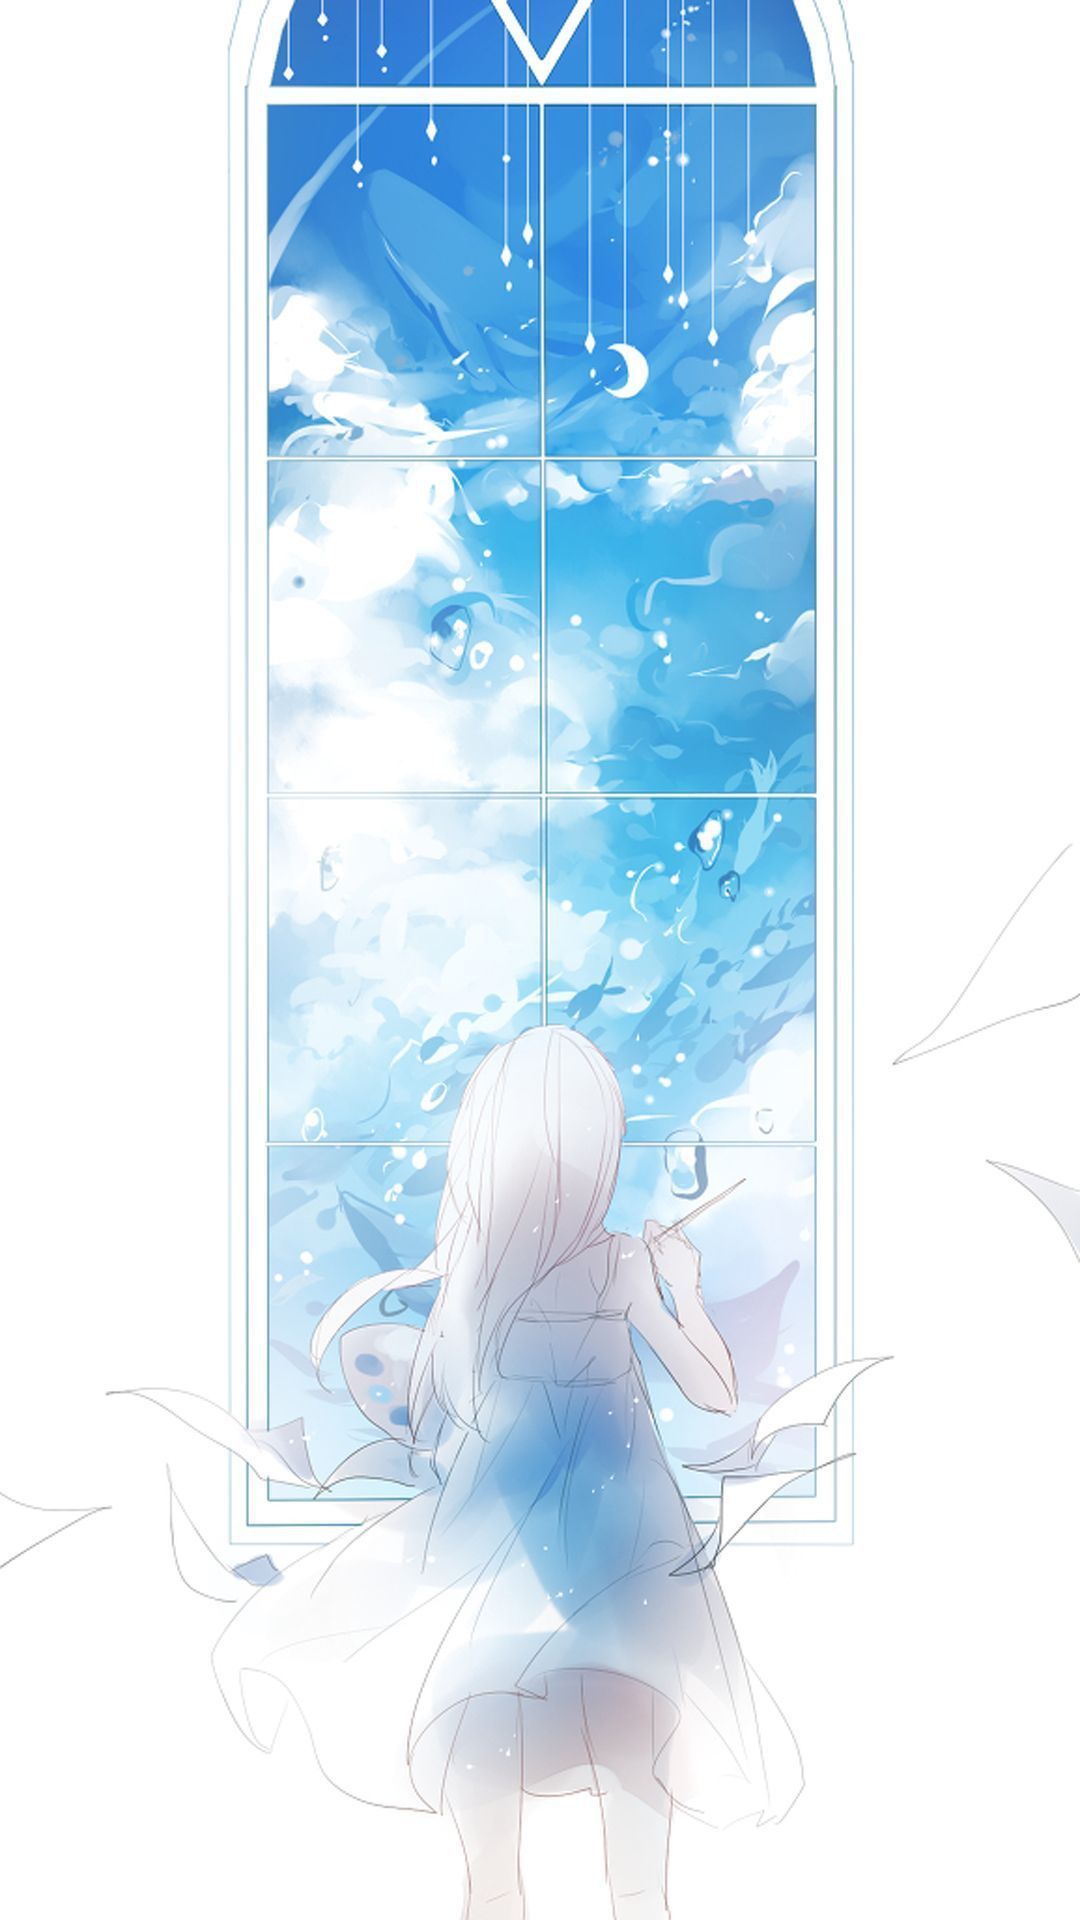 A girl looking out of an open window - Blue anime